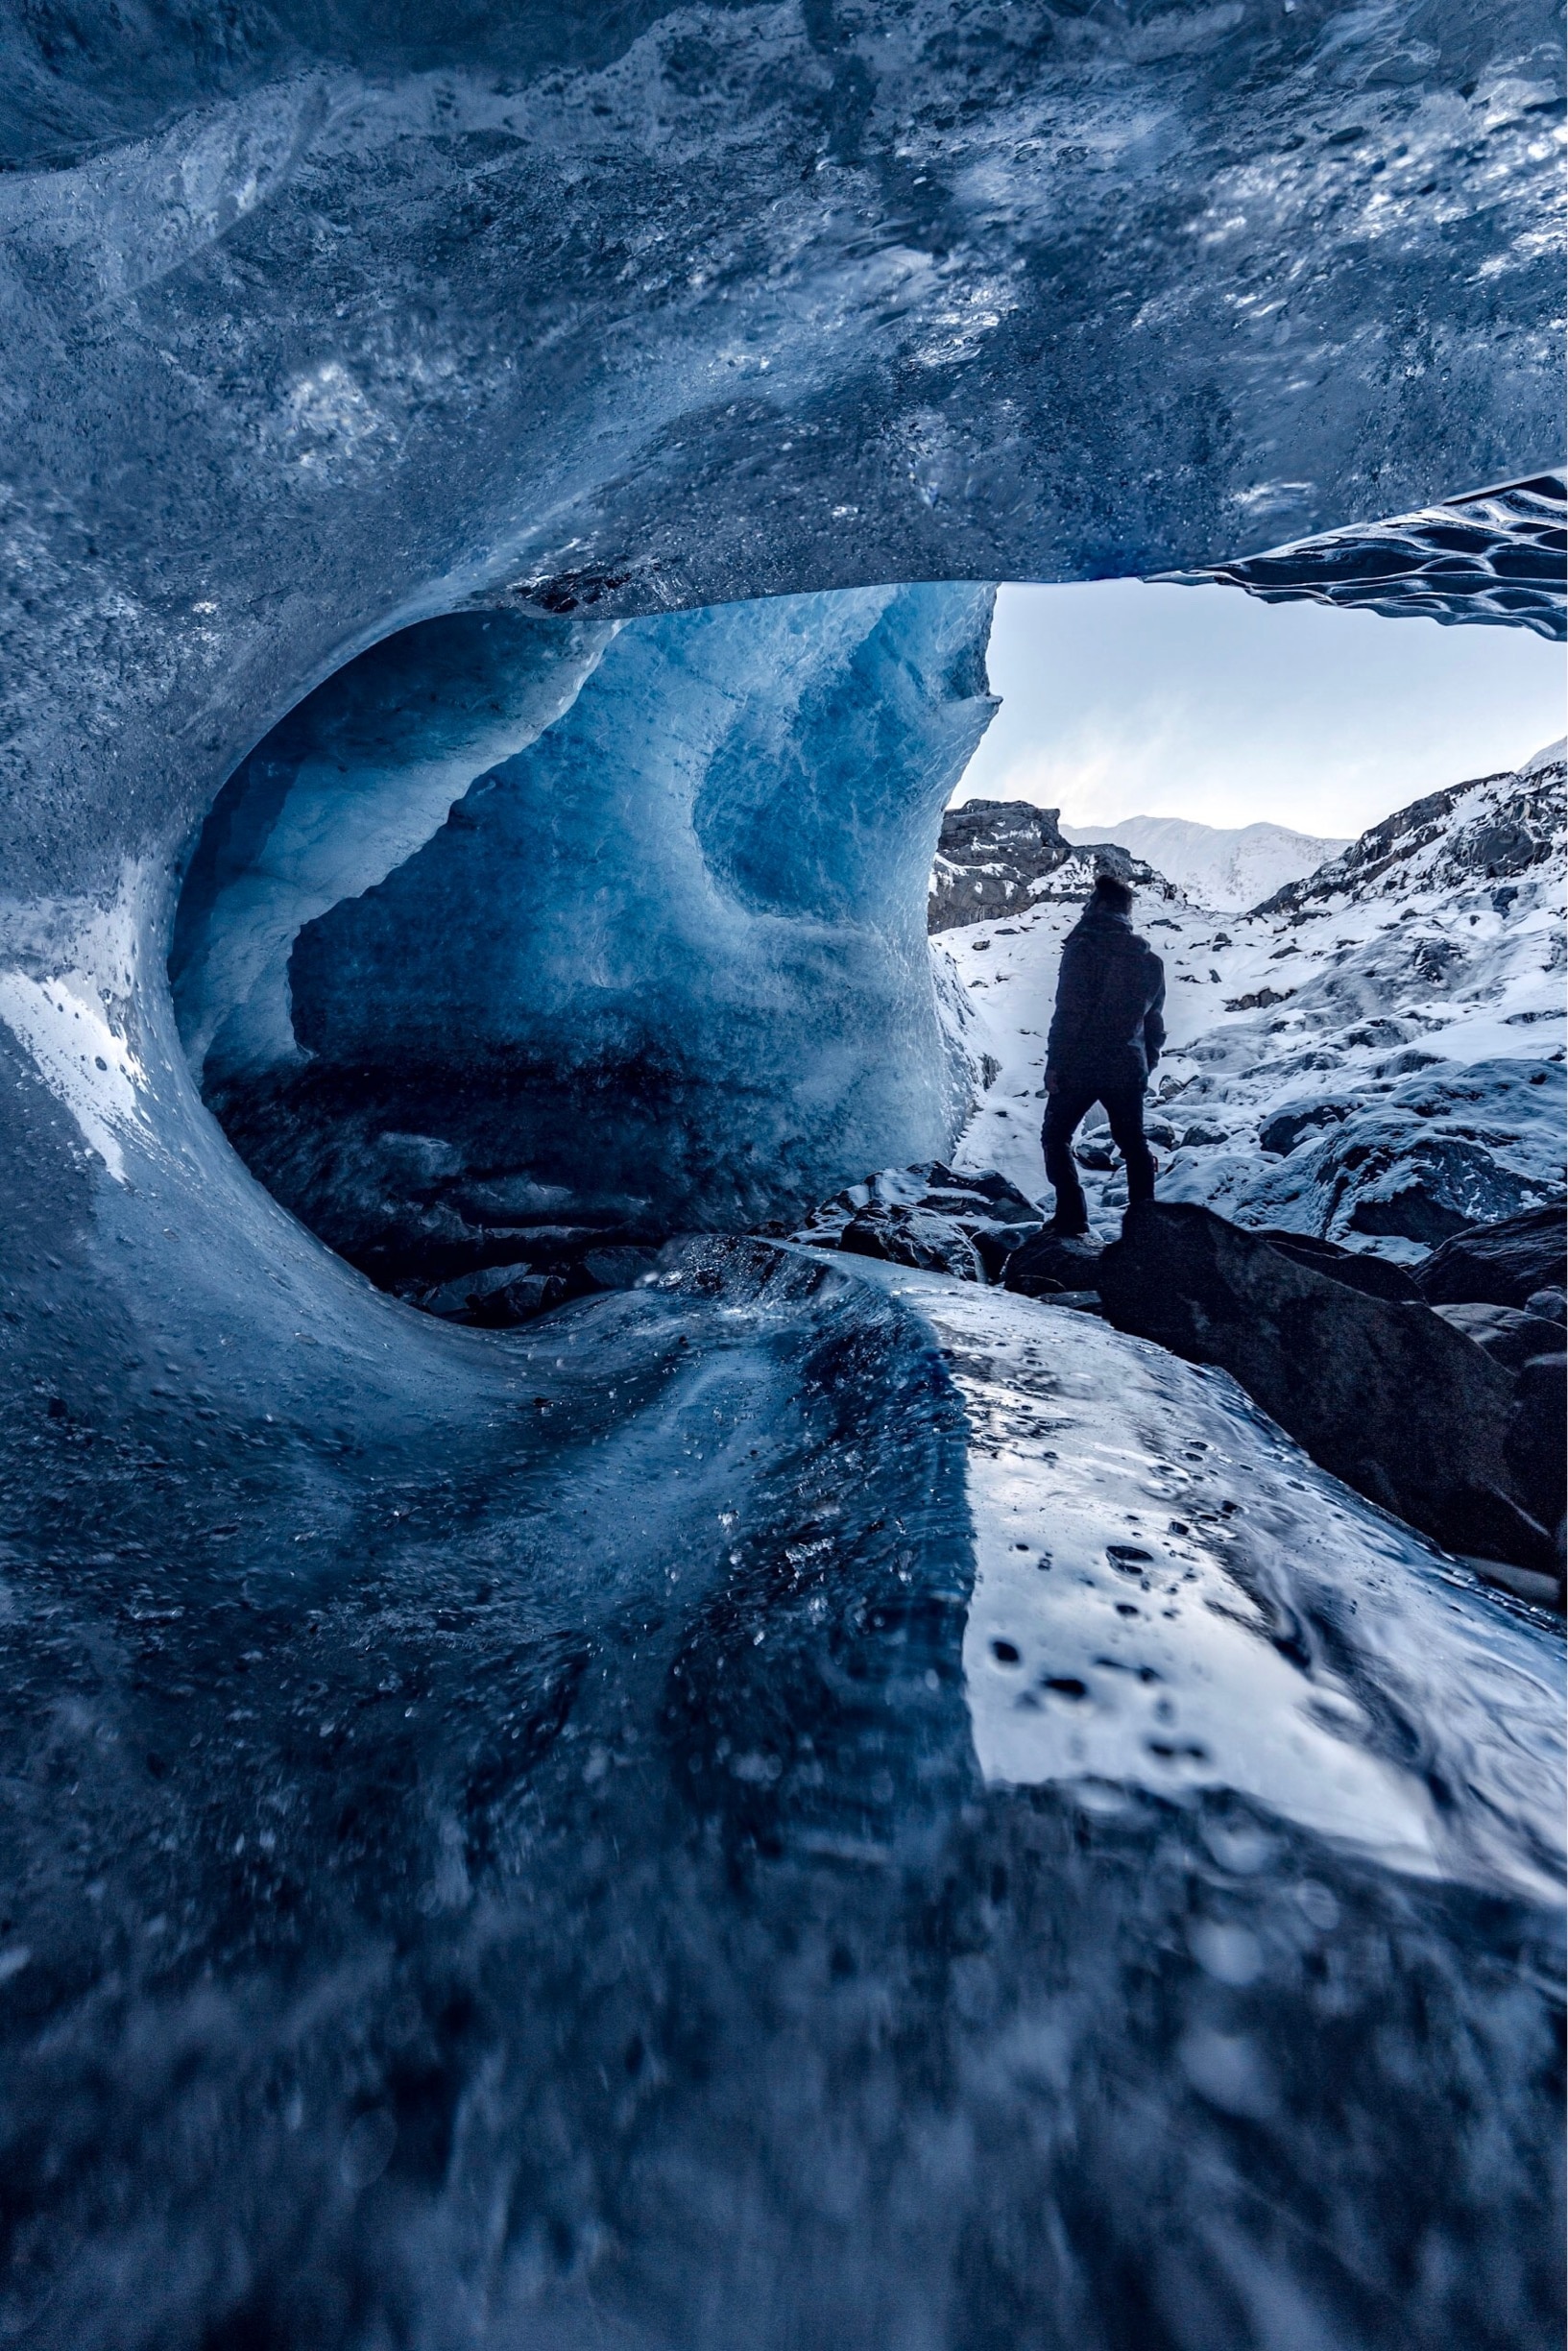 Took a day to go exploring with some friends up at the ice caves in Byron Glacier near Whittier, Alaska. I’ve lived in Alaska my whole life, but I’ve never tired of the epic blocks of ice. They’re absolutely stunning and if you haven’t had the opportunity to explore the inside of one yet, I highly recommend it!